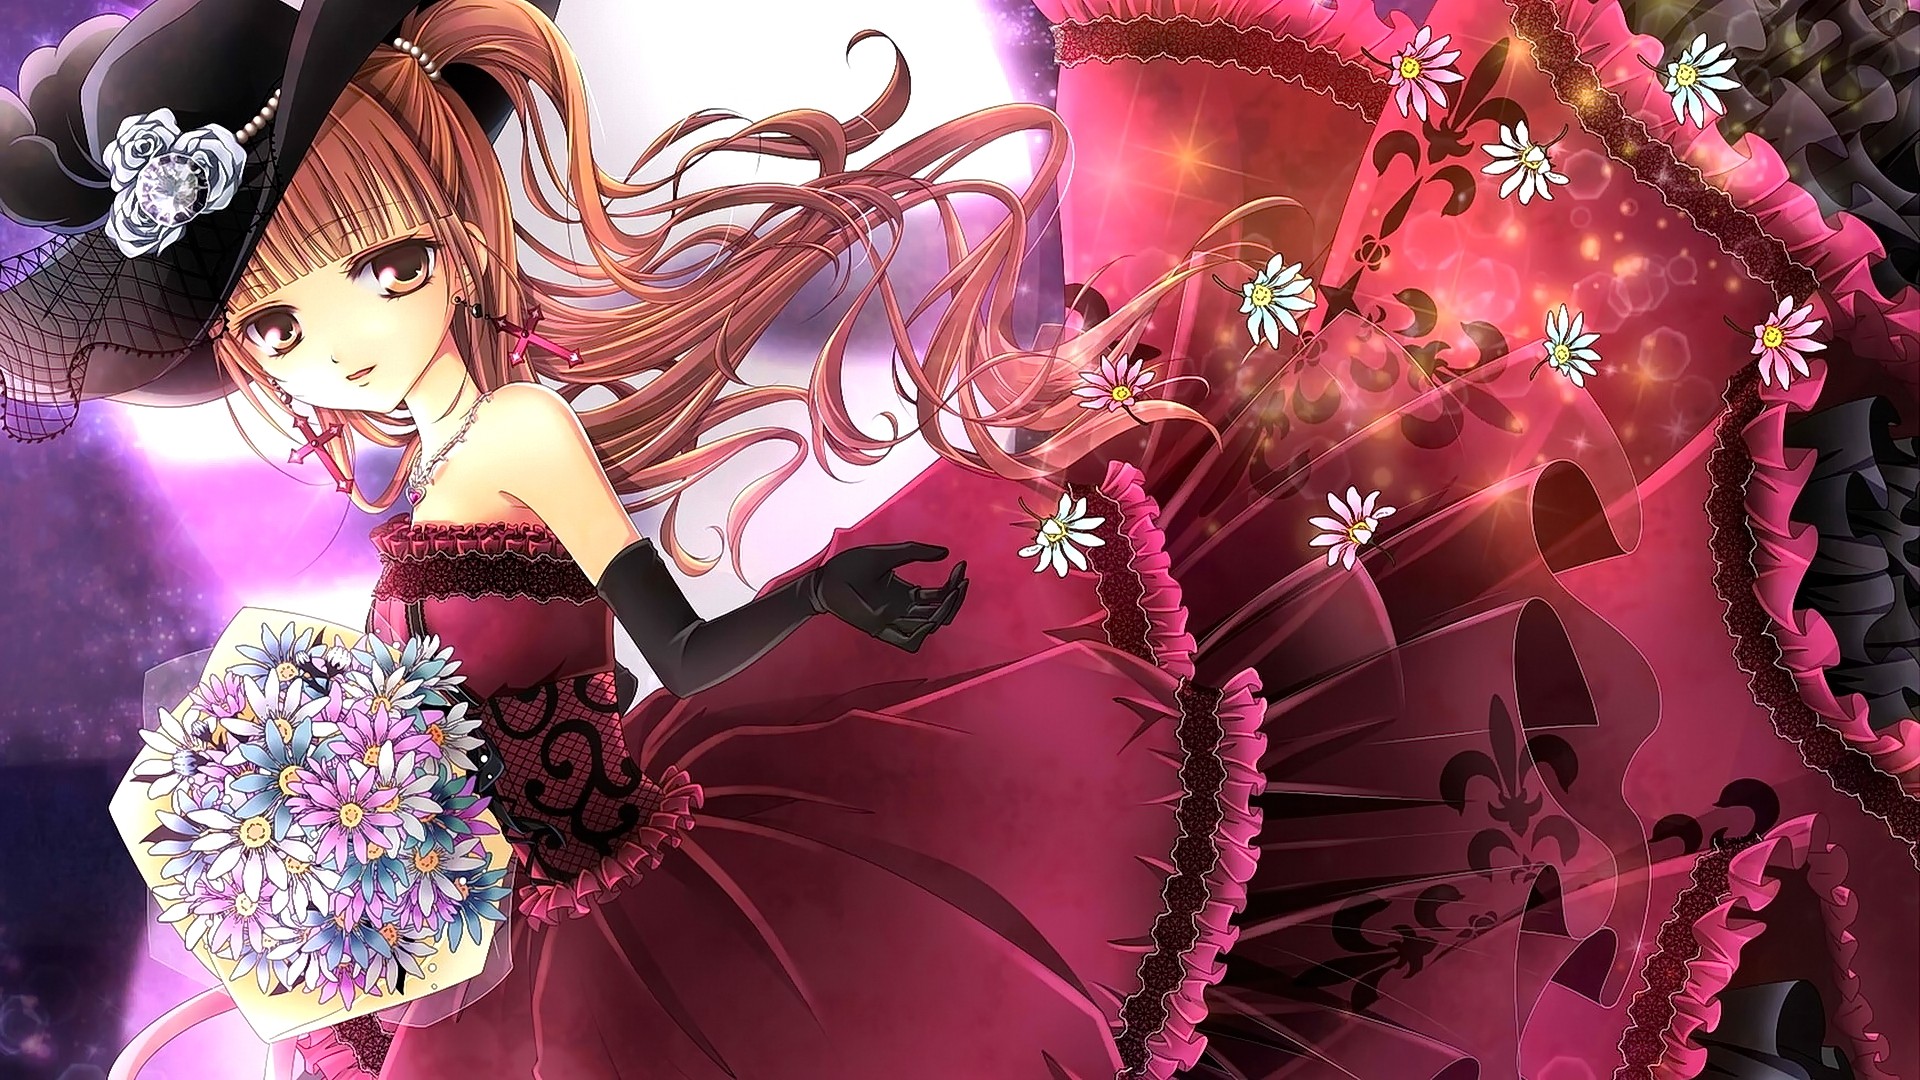 Anime 1920x1080 anime anime girls blonde long hair looking at viewer hat flowers original characters lolita fashion frills women with hats bouquet